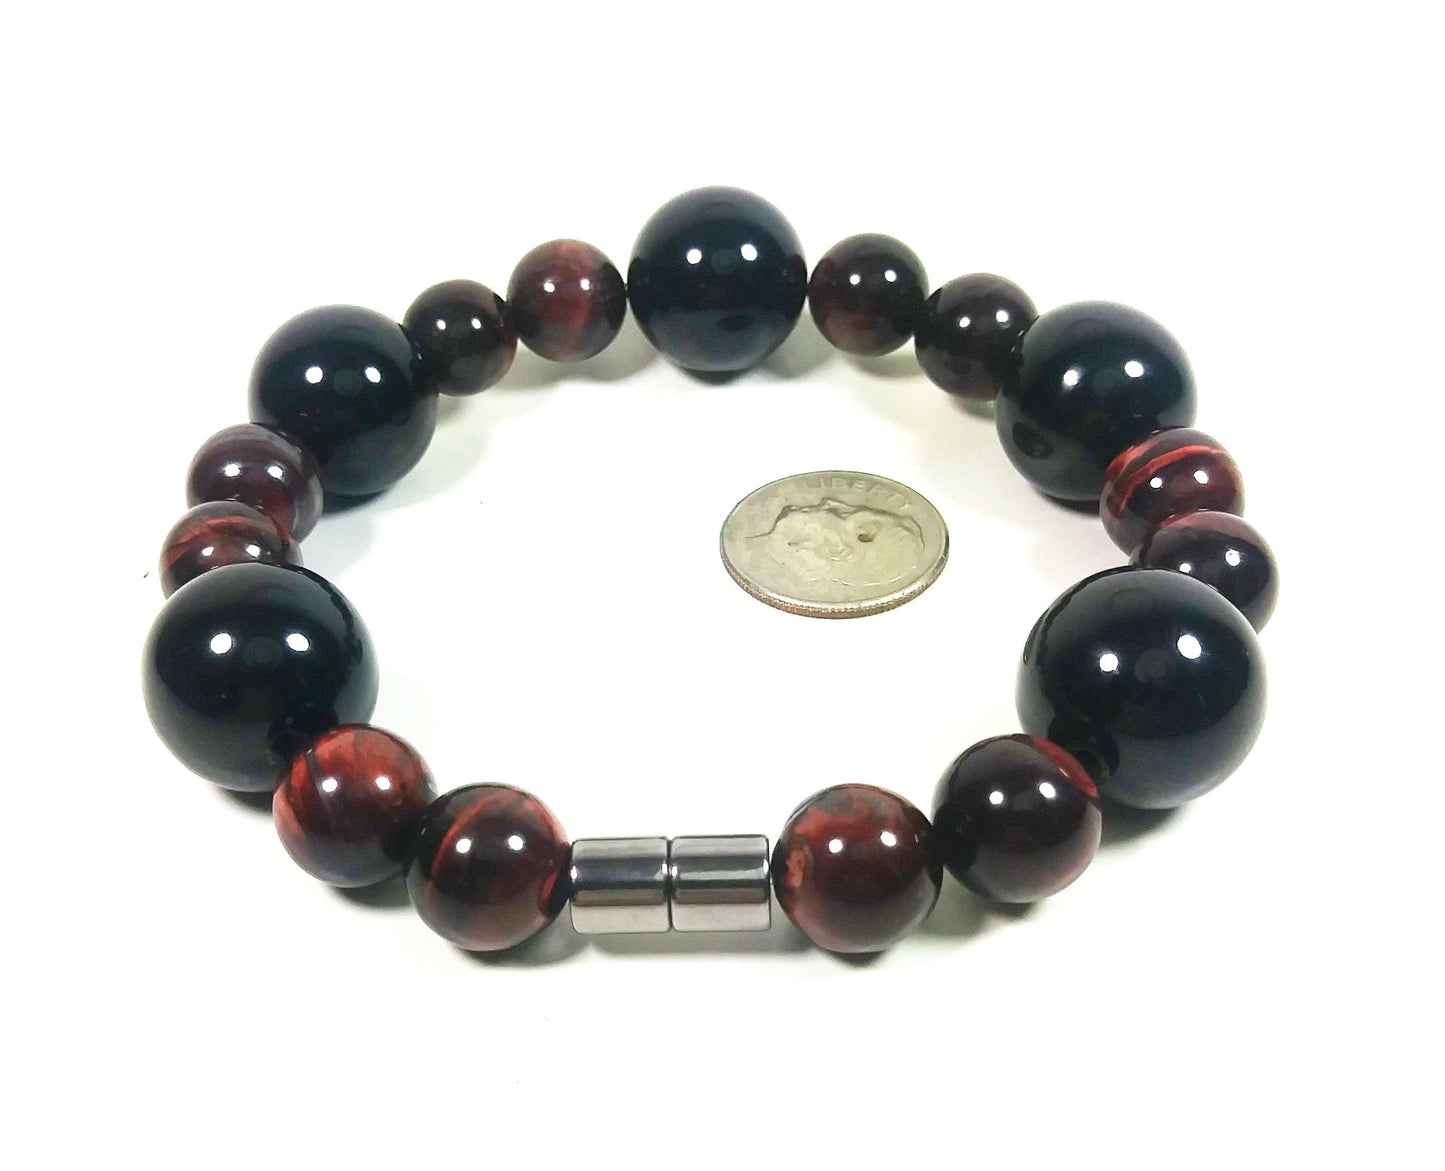 Red Tiger Eye & Onyx Bead Bracelet For Men And Women - Confidence - Protection -Super Strong Magnetic Clasp